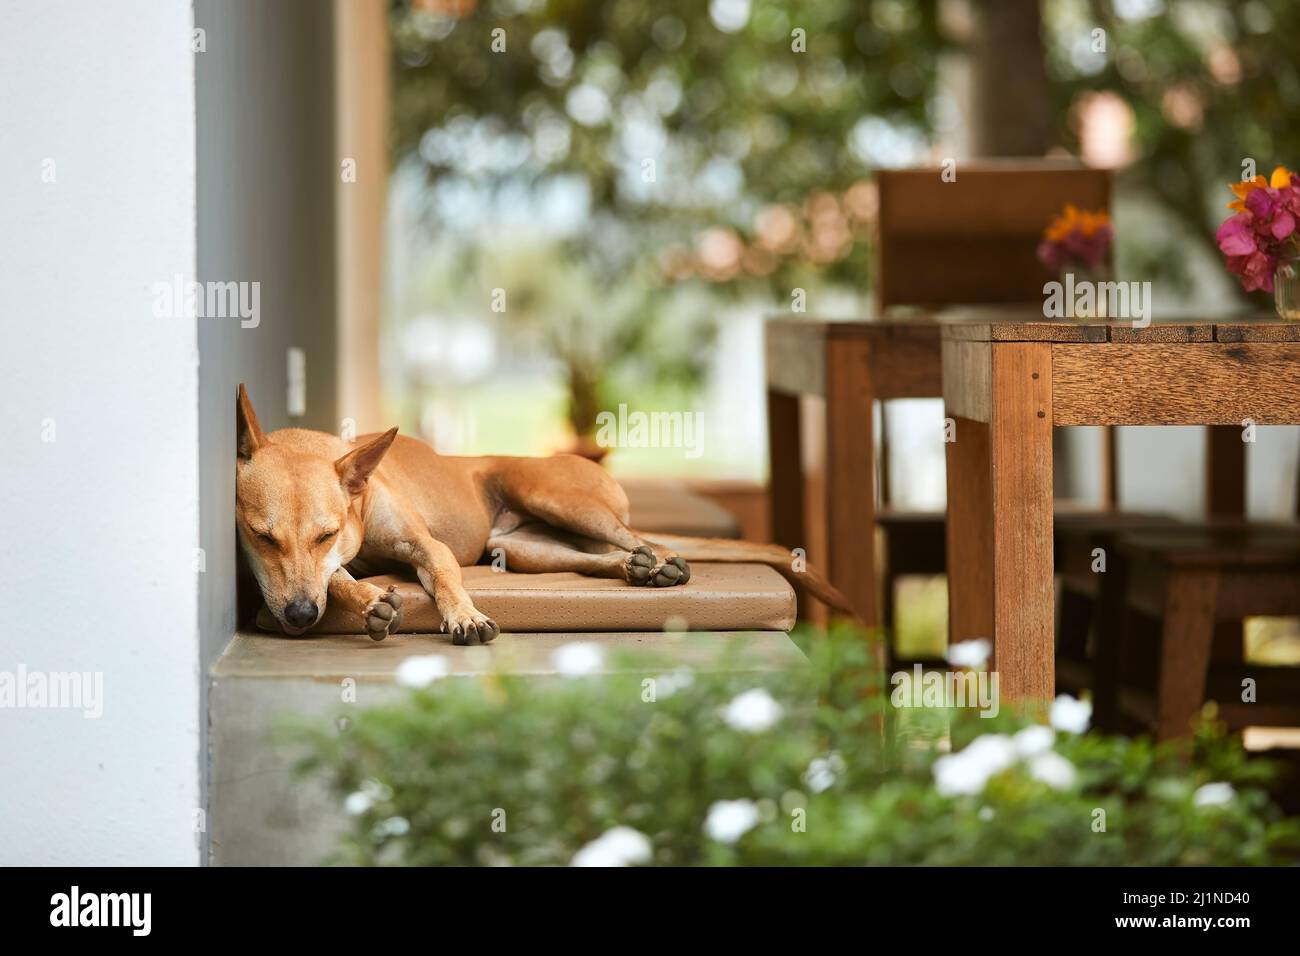 Cute dog sleeping on bench during hot summer day. Stock Photo